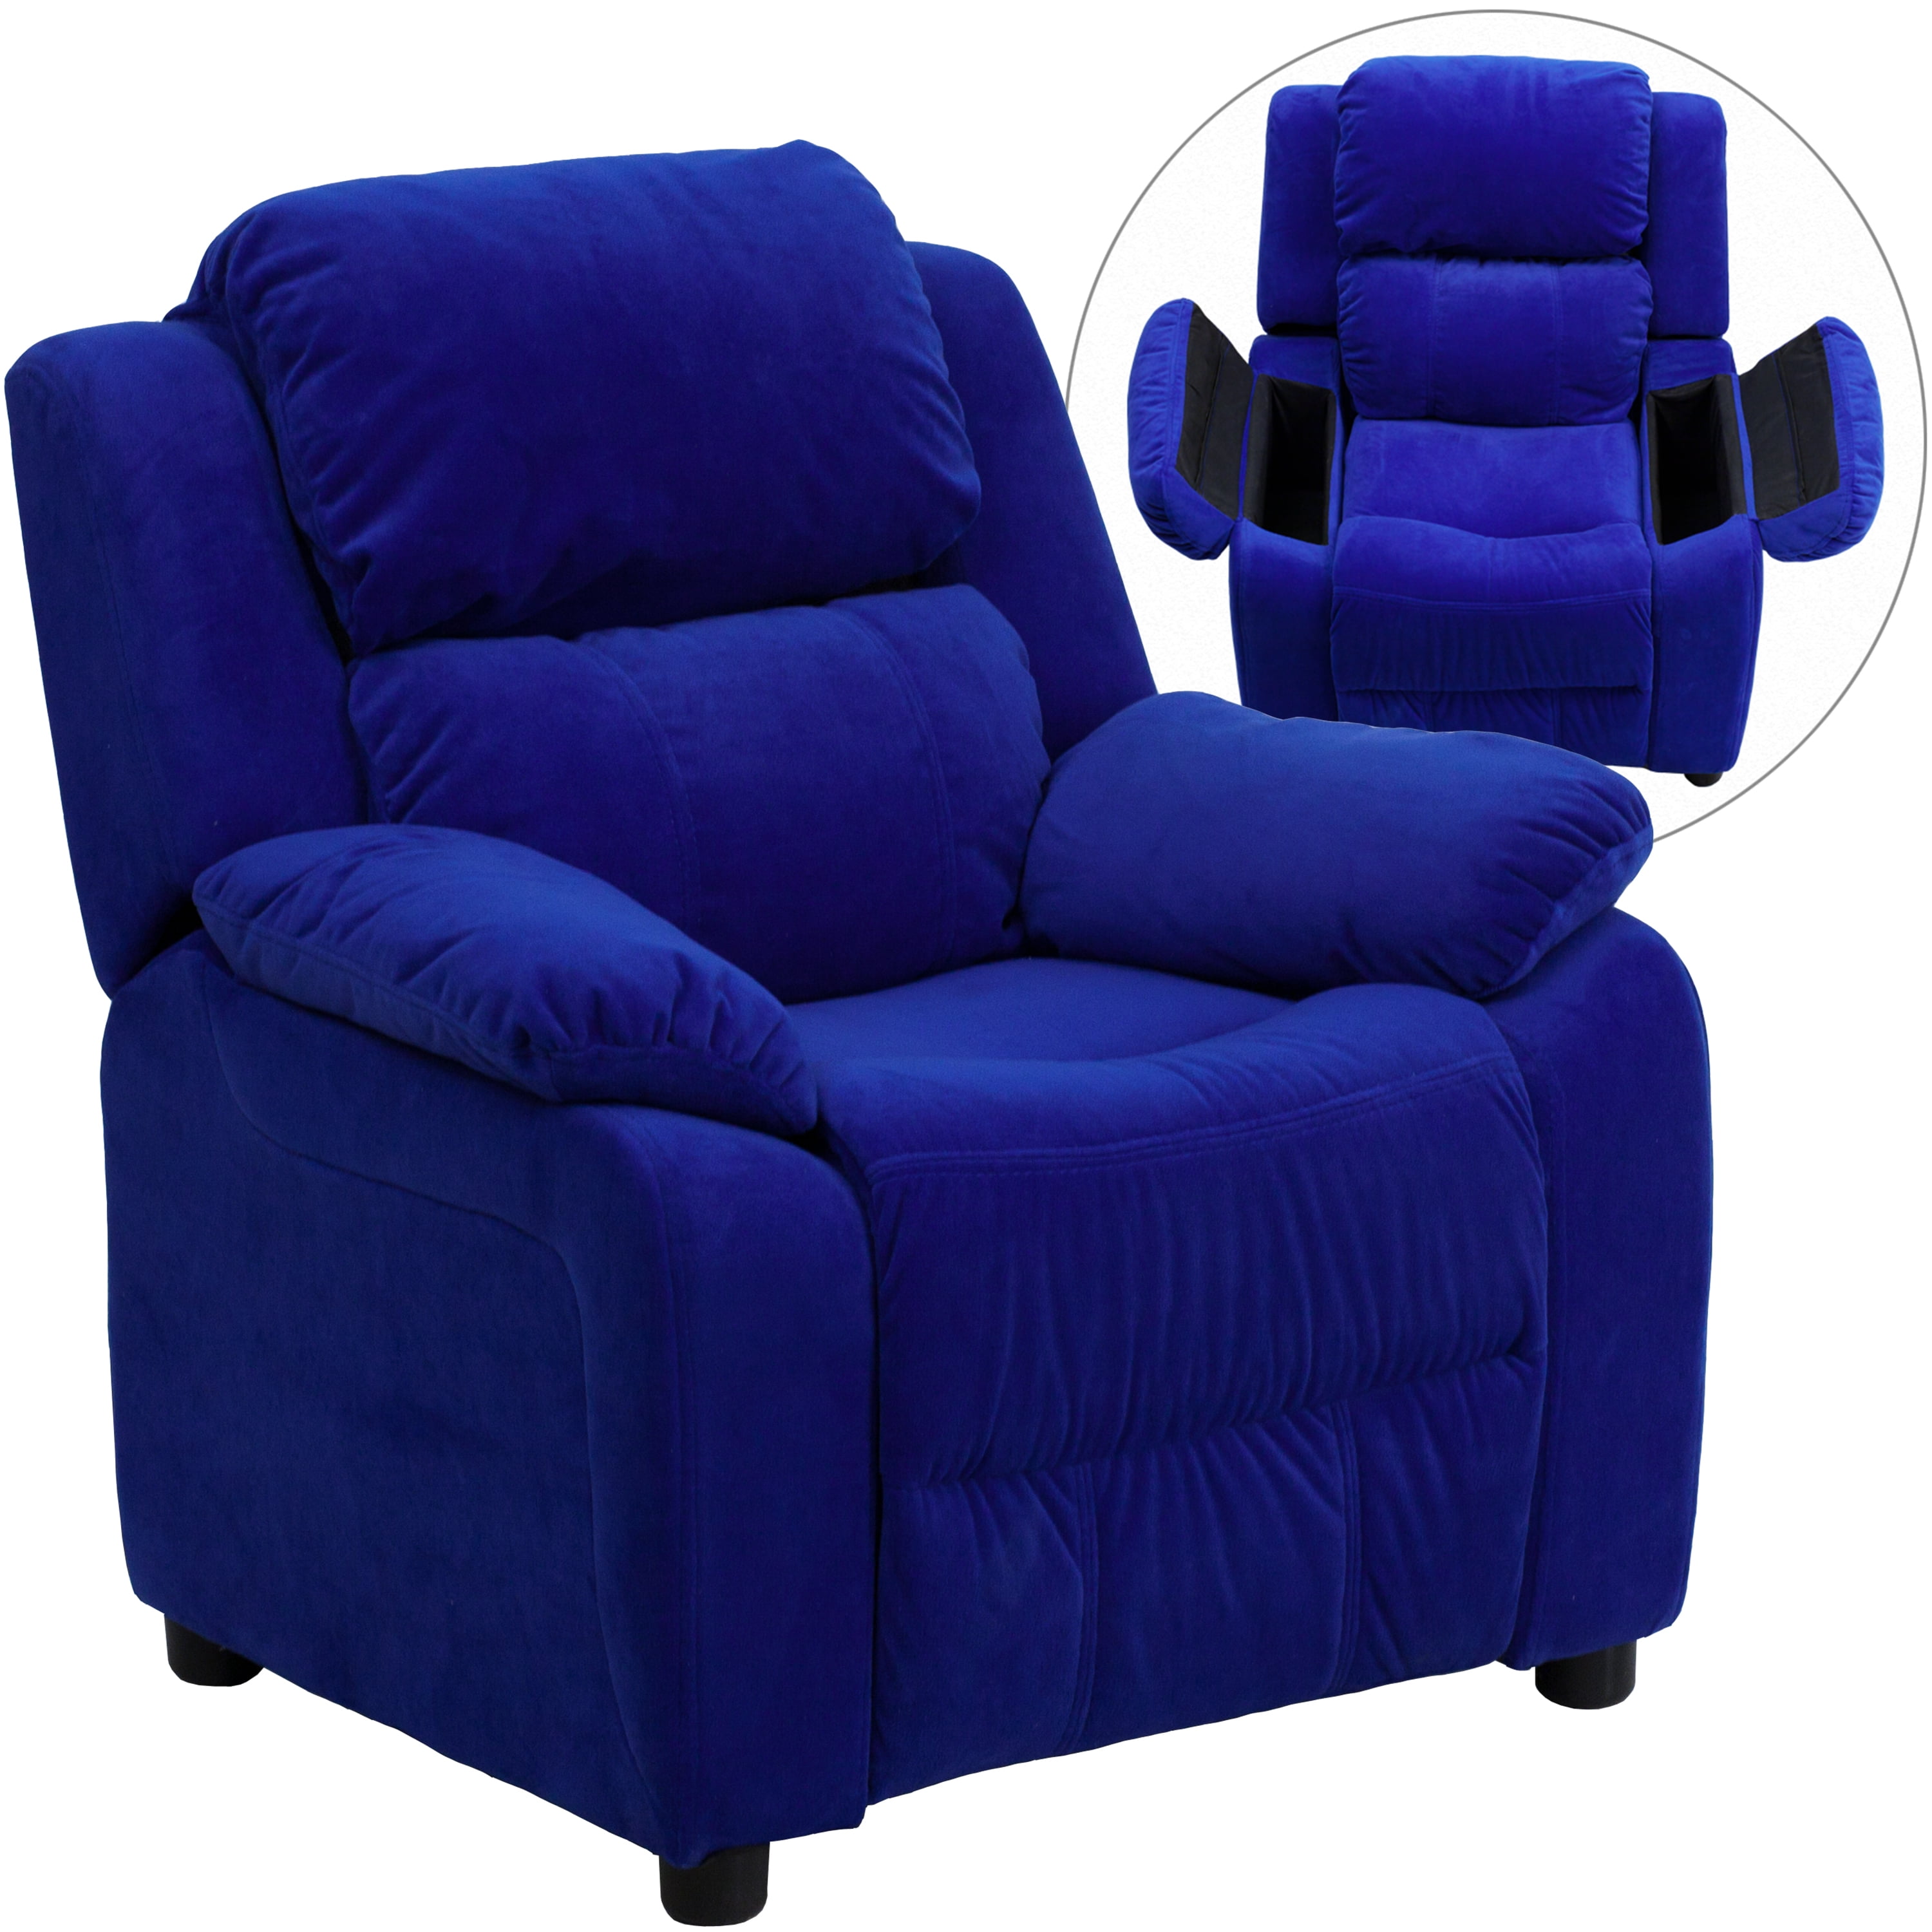 Flash Furniture Deluxe Padded Contemporary Blue Microfiber Kids Recliner with Storage Arms - image 2 of 13